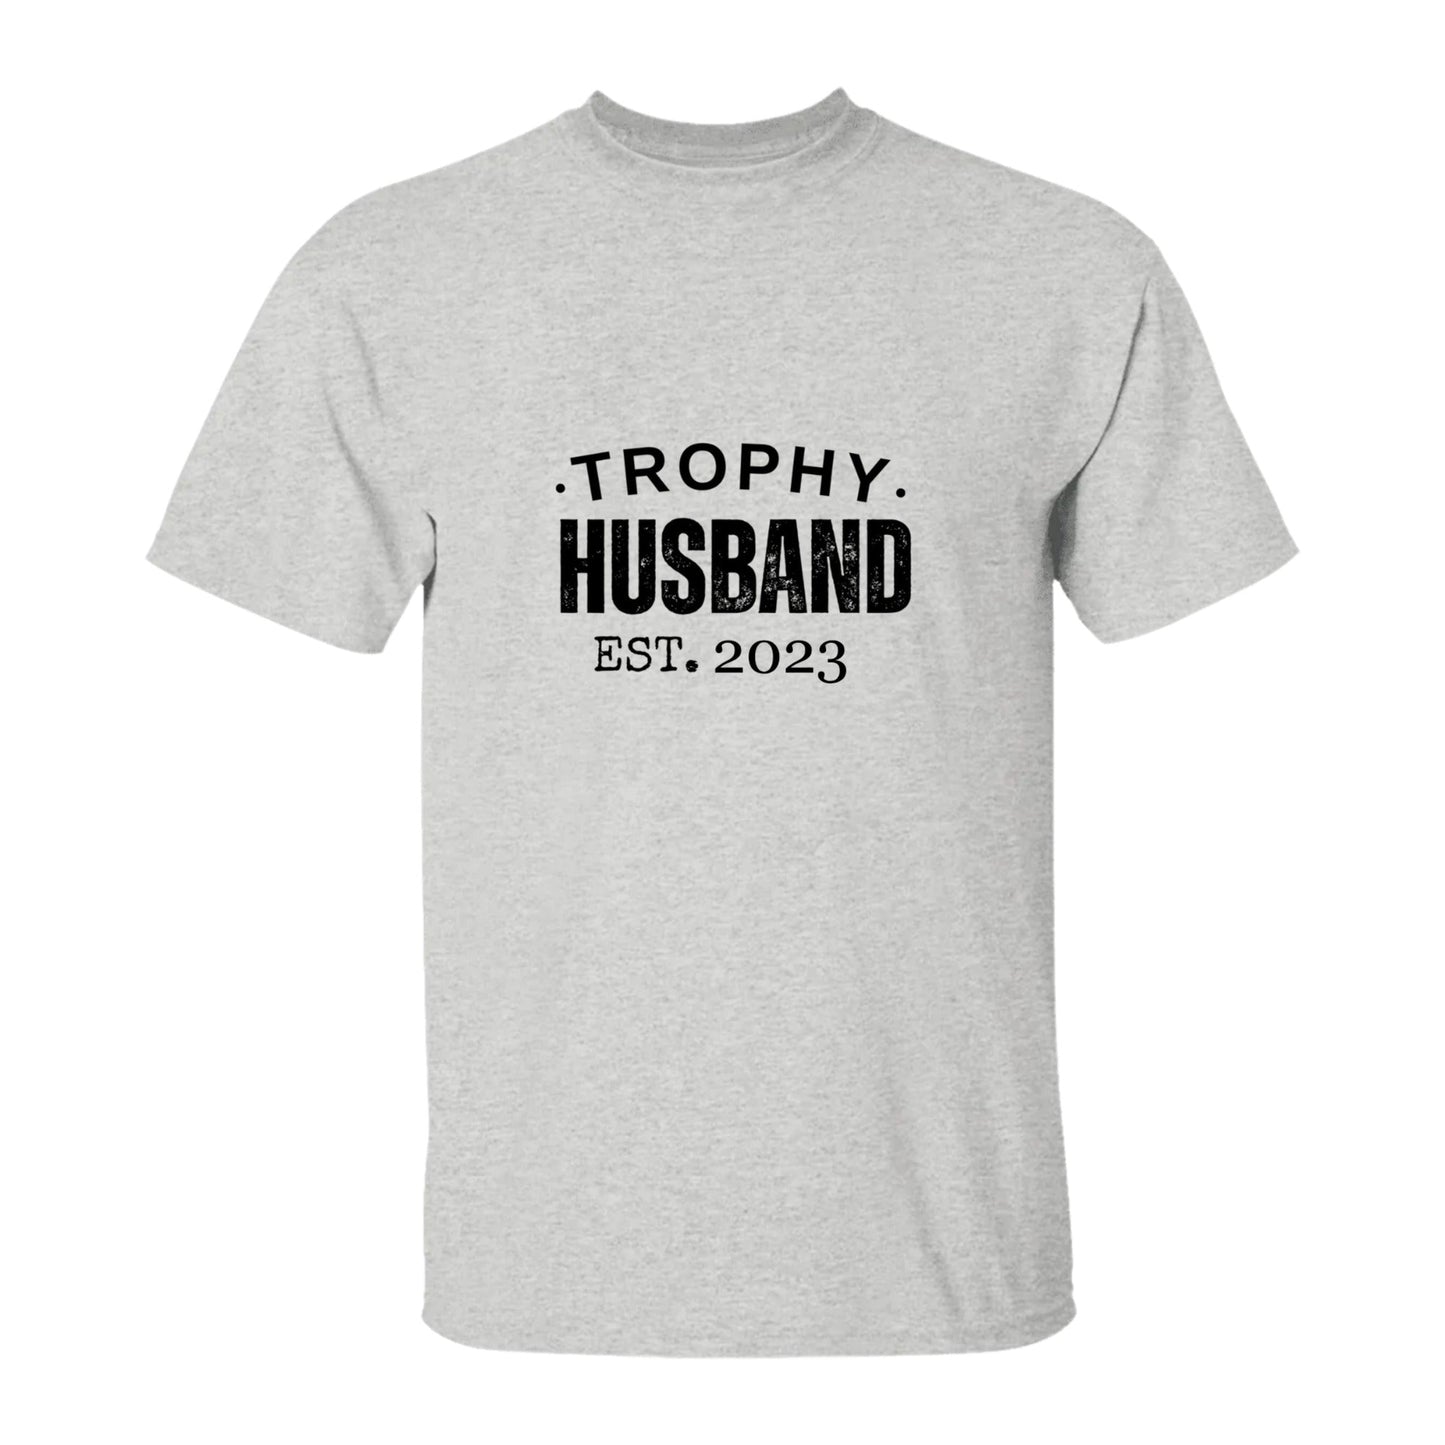 Get trendy with Trophy Husband T-Shirt -  available at Good Gift Company. Grab yours for $22.95 today!